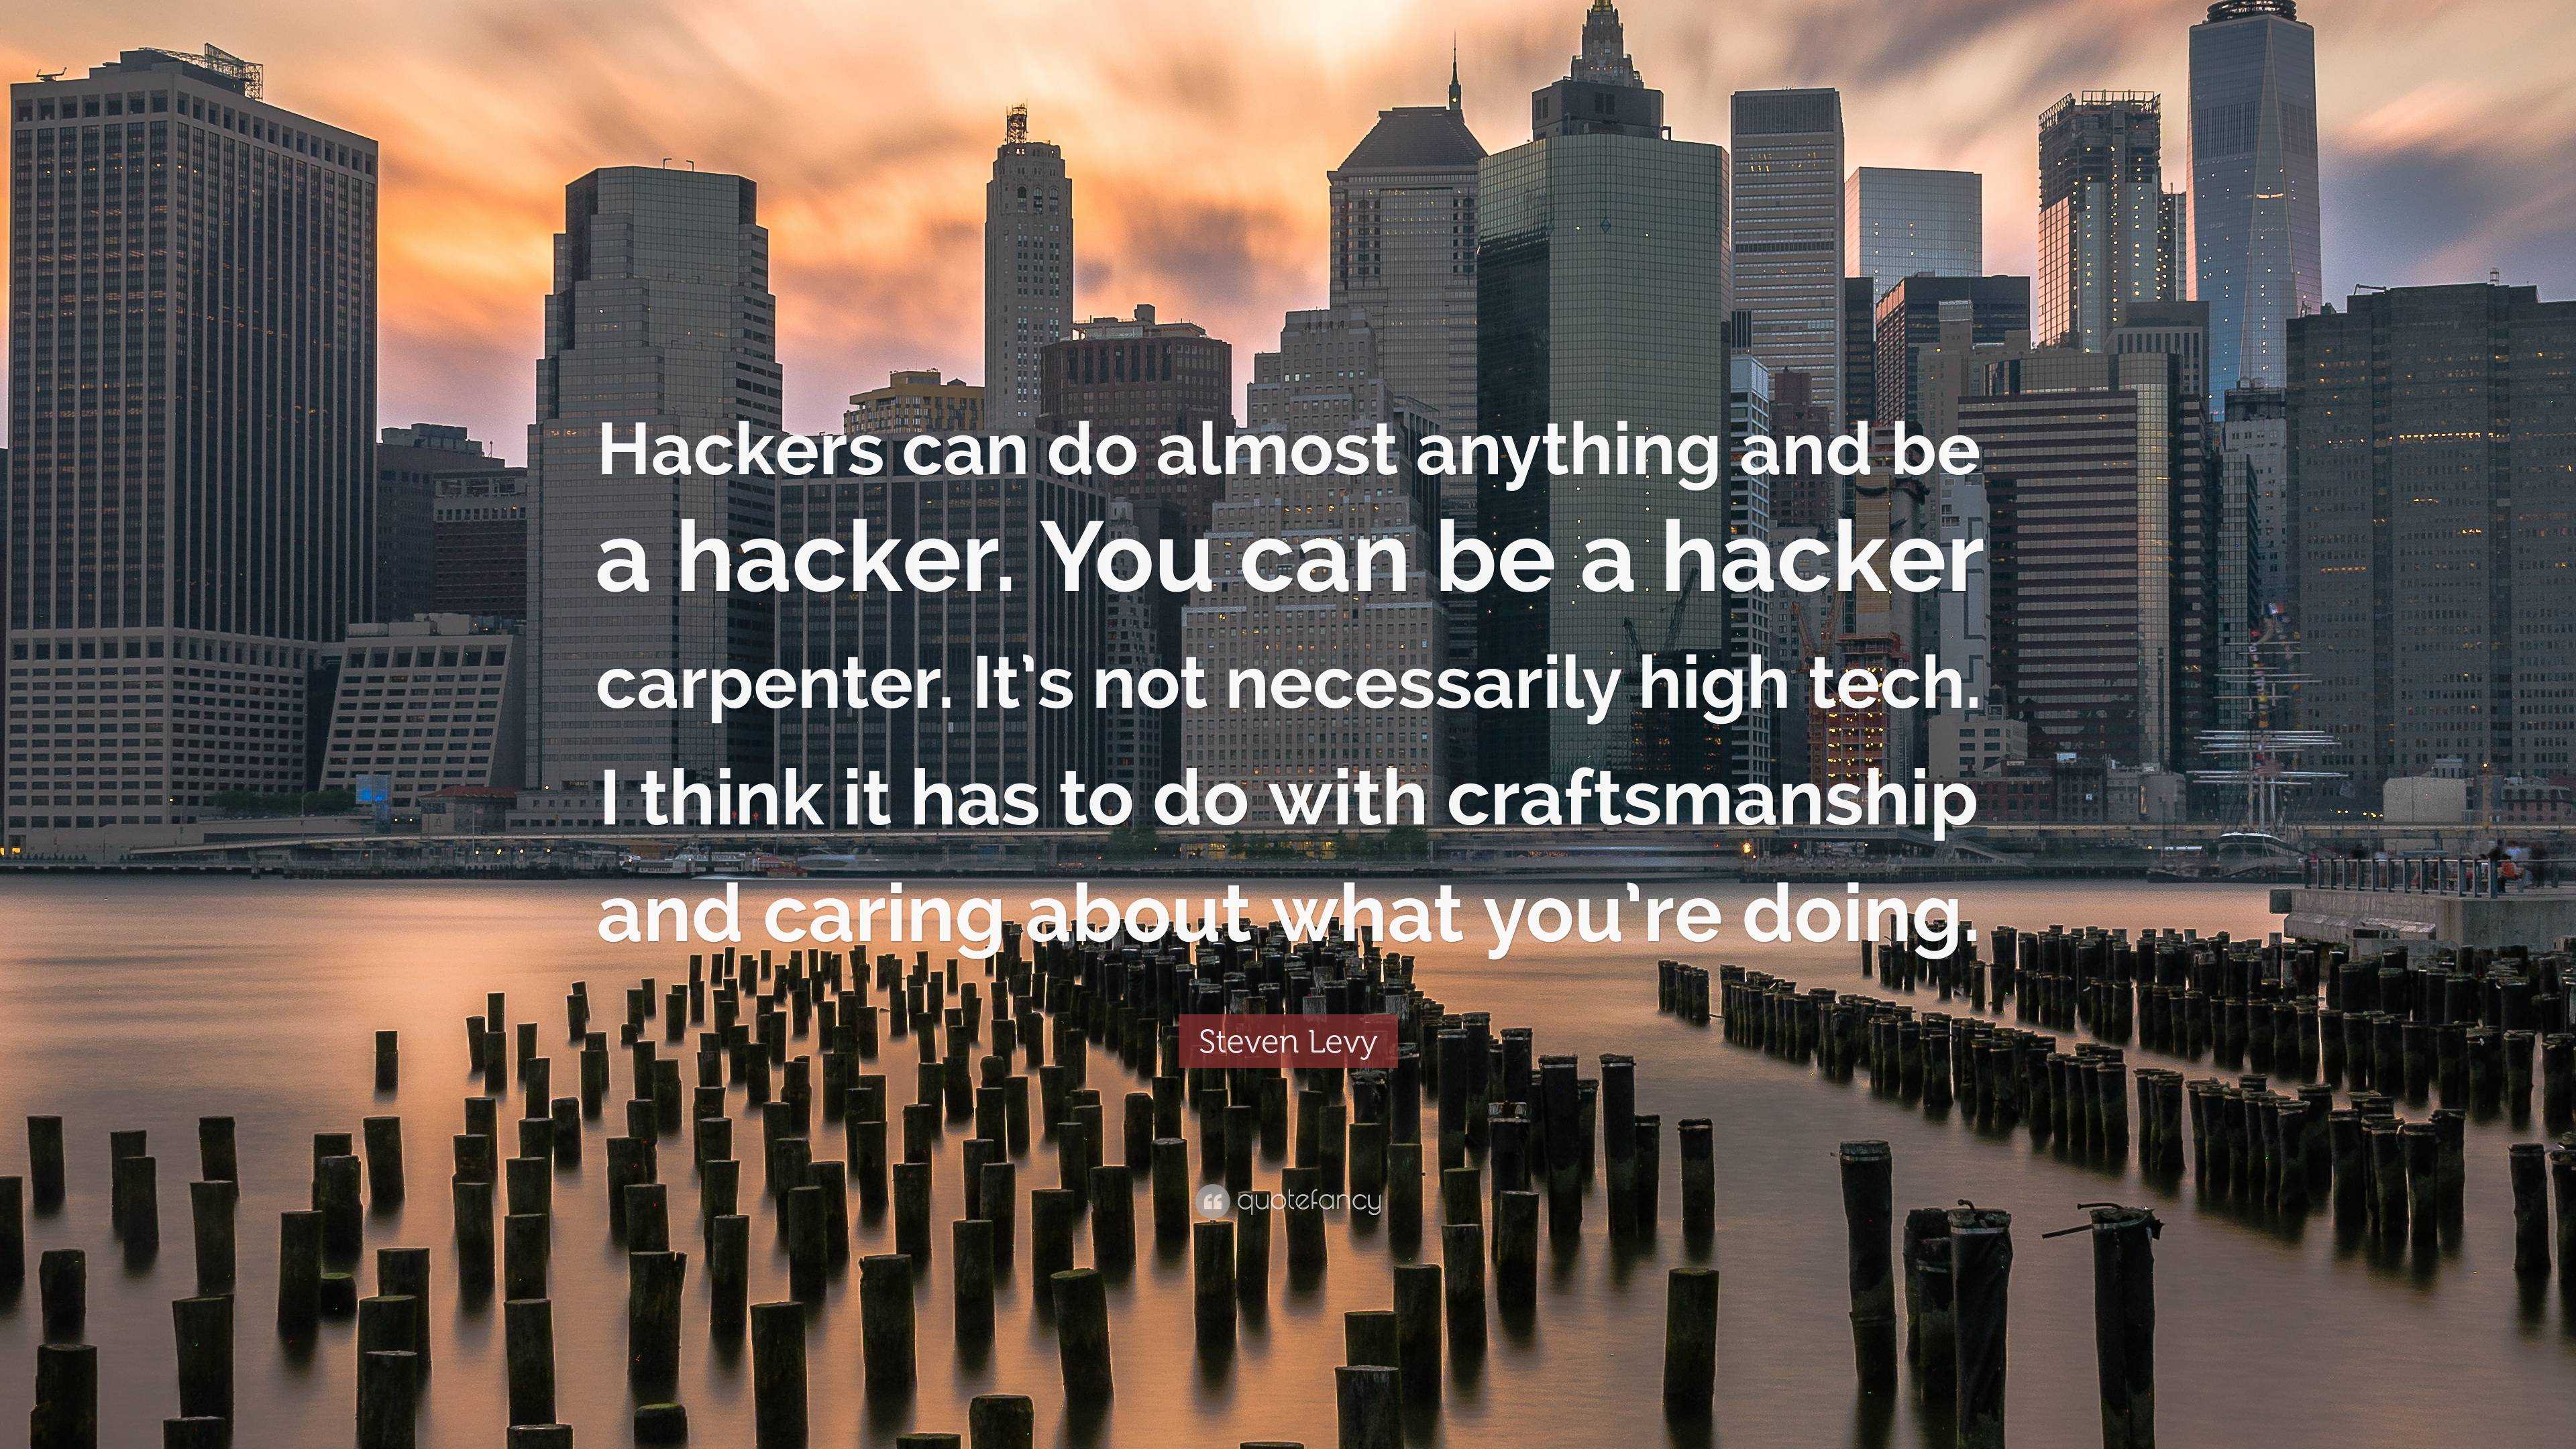 Steven Levy Quote: “Hackers can do almost anything and be a hacker. You can  be a hacker carpenter. It's not necessarily high tech. I think i...”